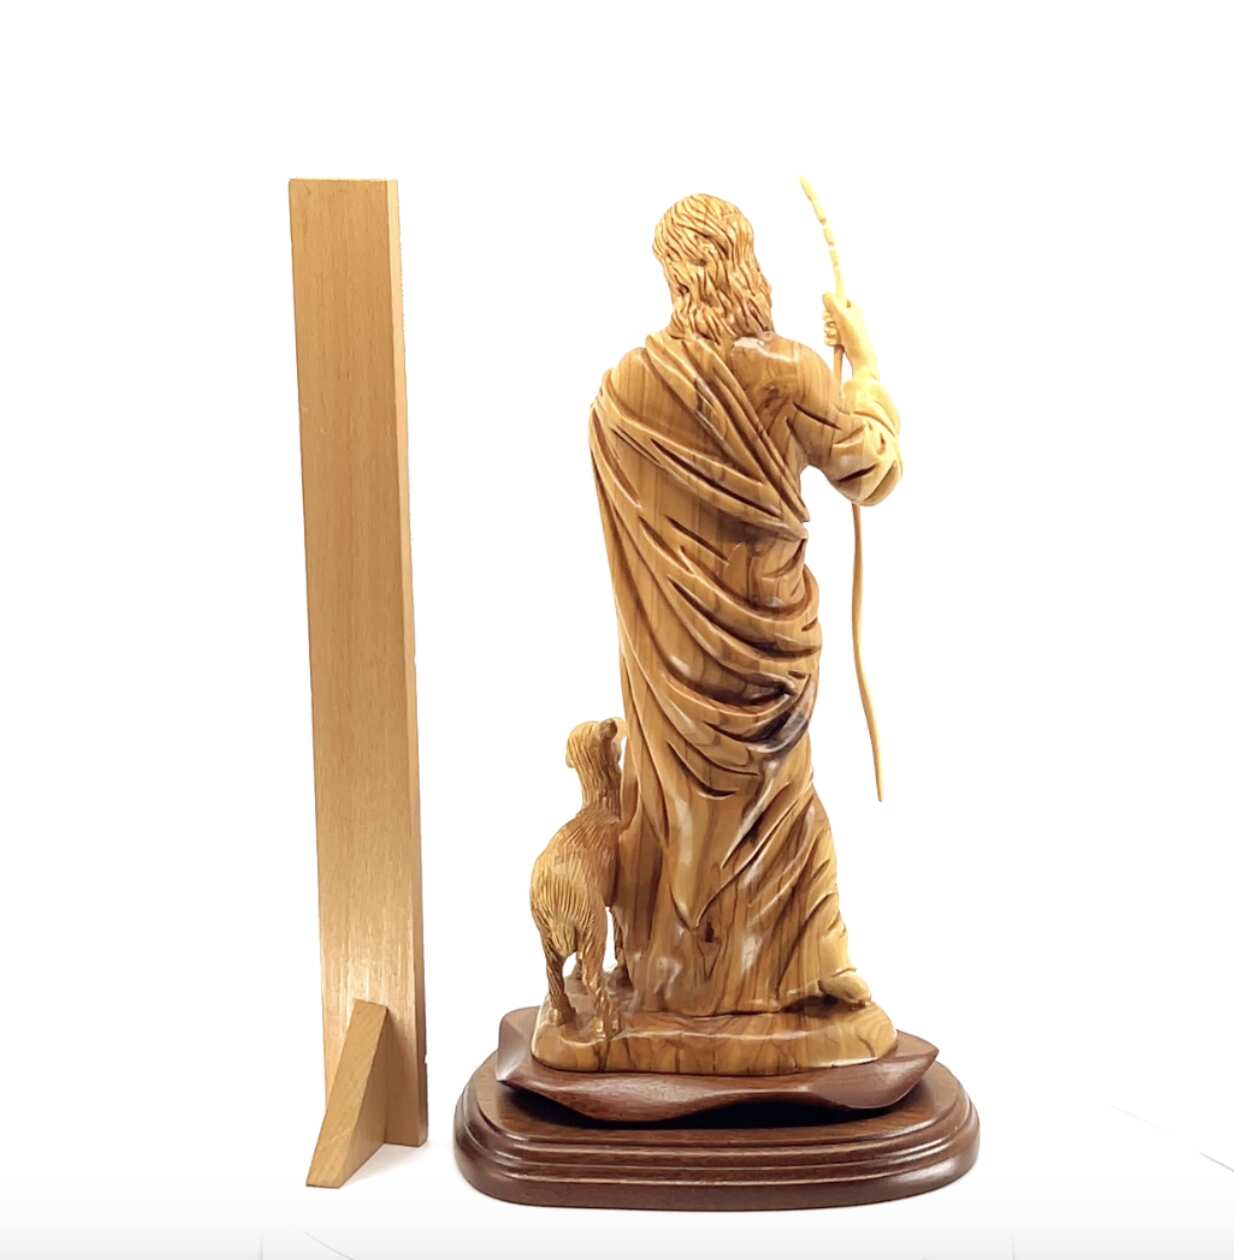 Jesus Christ "The Good Shepherd" Statue, 12.6" Sculpture from Holy Land Olive Wood